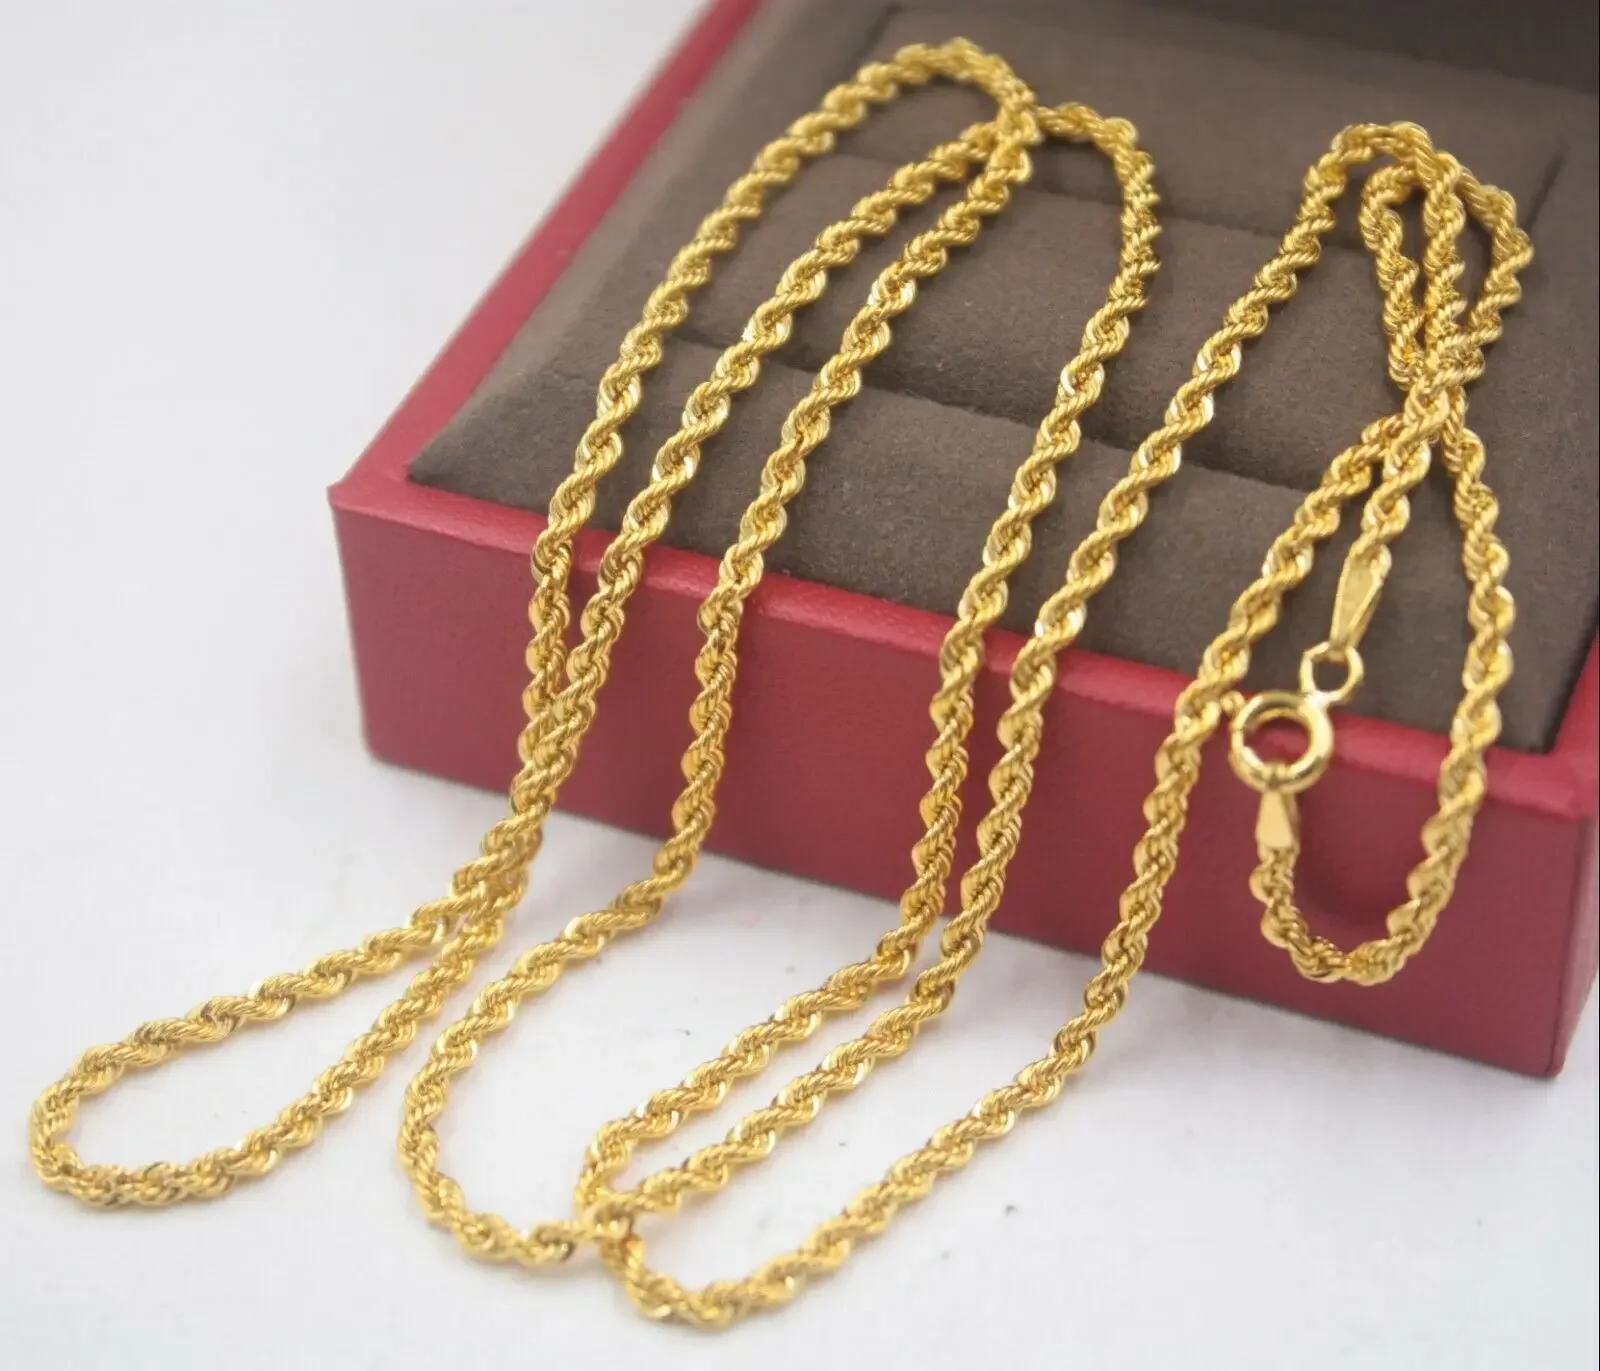 

18K Solid Yellow Gold Rope Chain Necklace For Women 16" 18" 20" 22" 24" GUARANTEED 18KT PURE GOLD 2mm Link Necklace Female